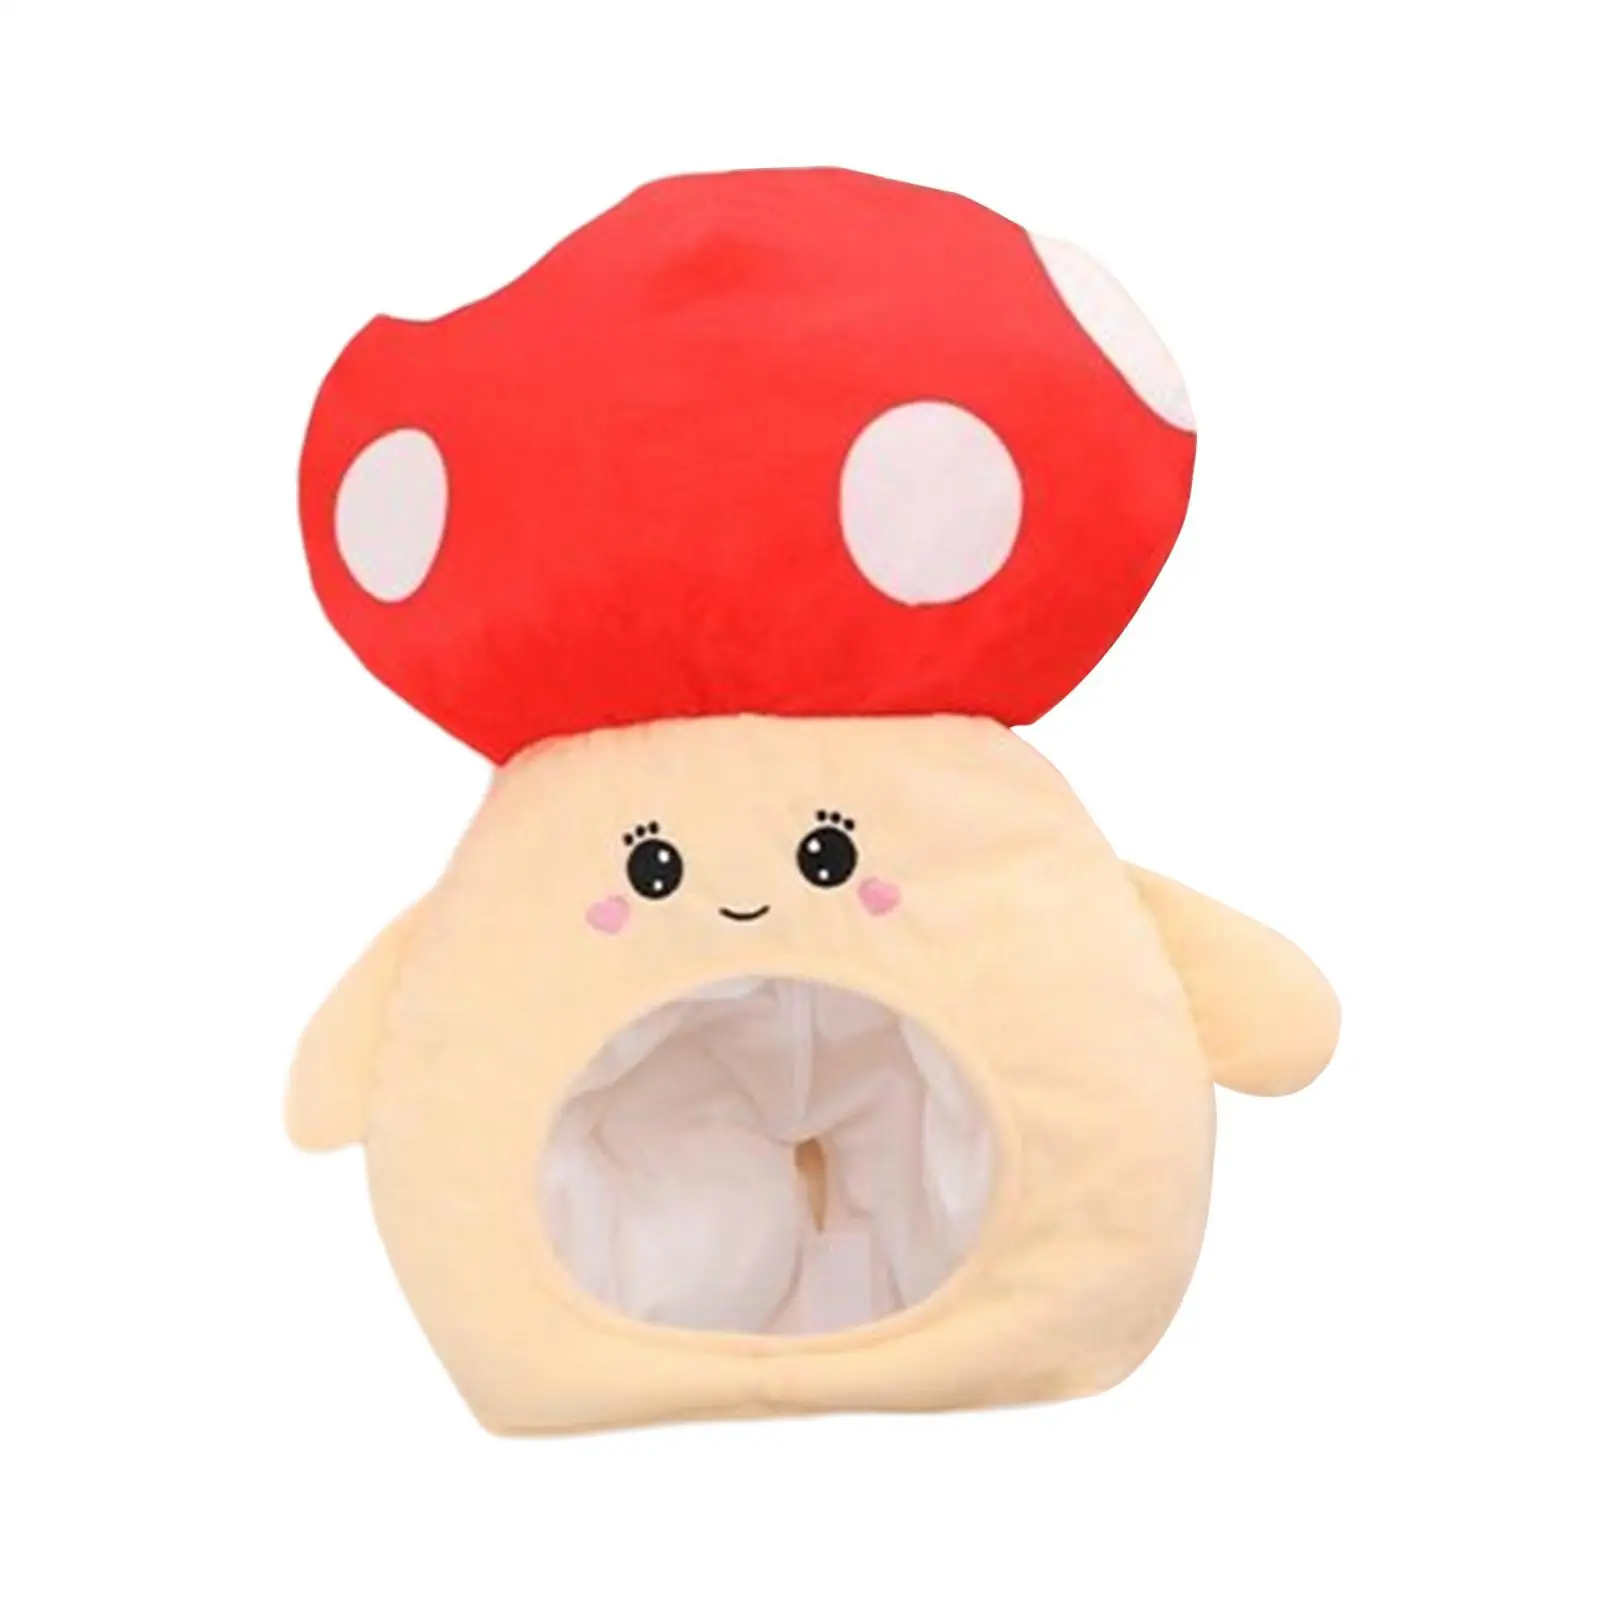 Cute Plush Mushroom Hat Cosplay Headwear for Adults Kids Selfie Novelty Hats Party Hats Headgear for Holiday Photo Props